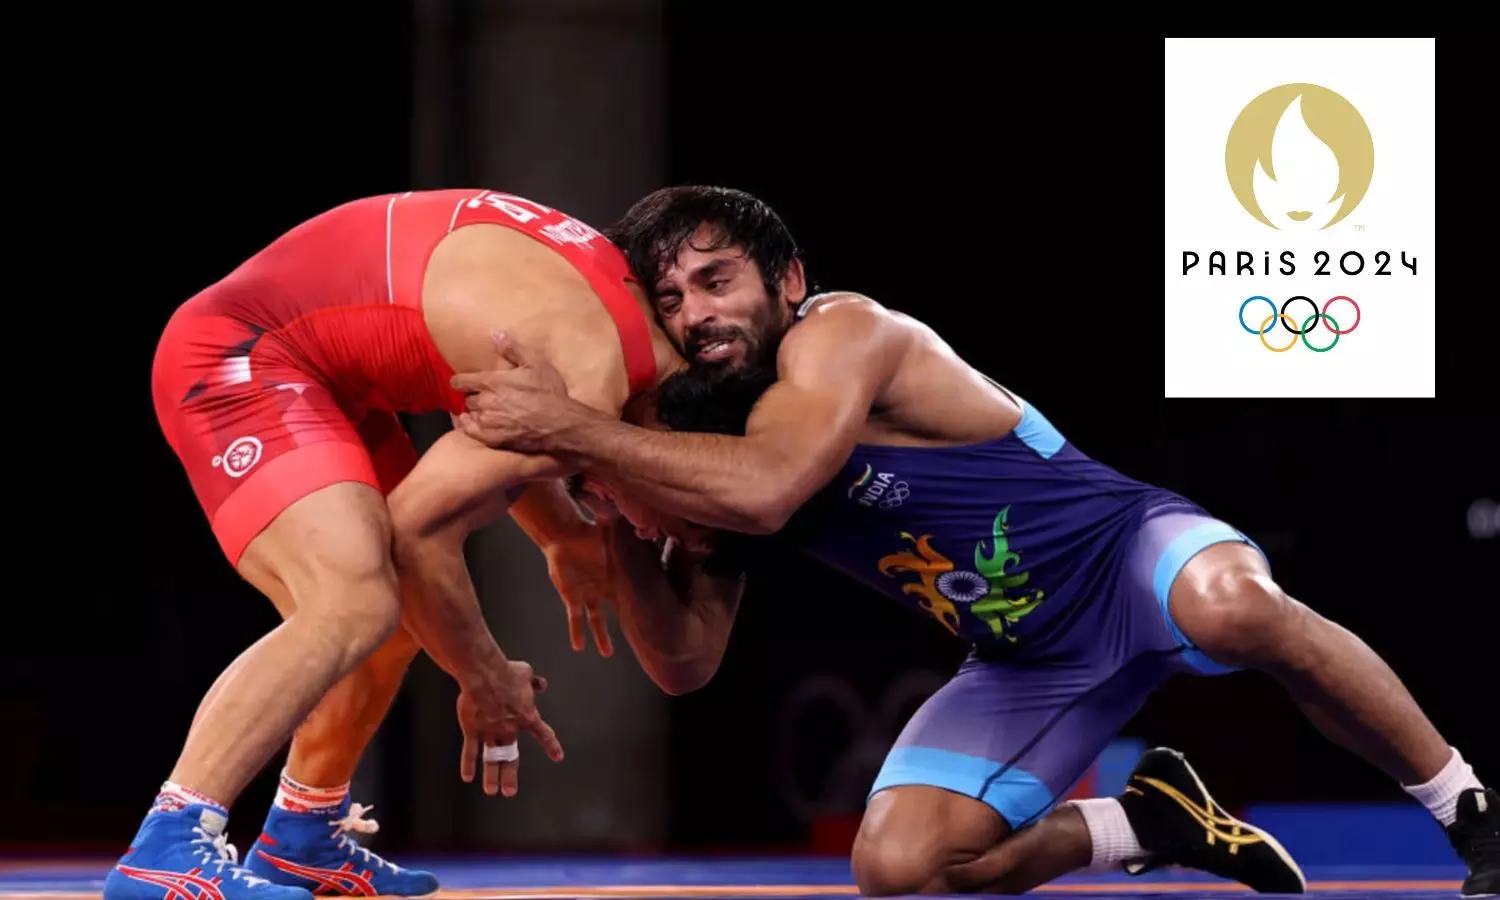 Final chance for Indian wrestlers to qualify for Paris Olympics 2024